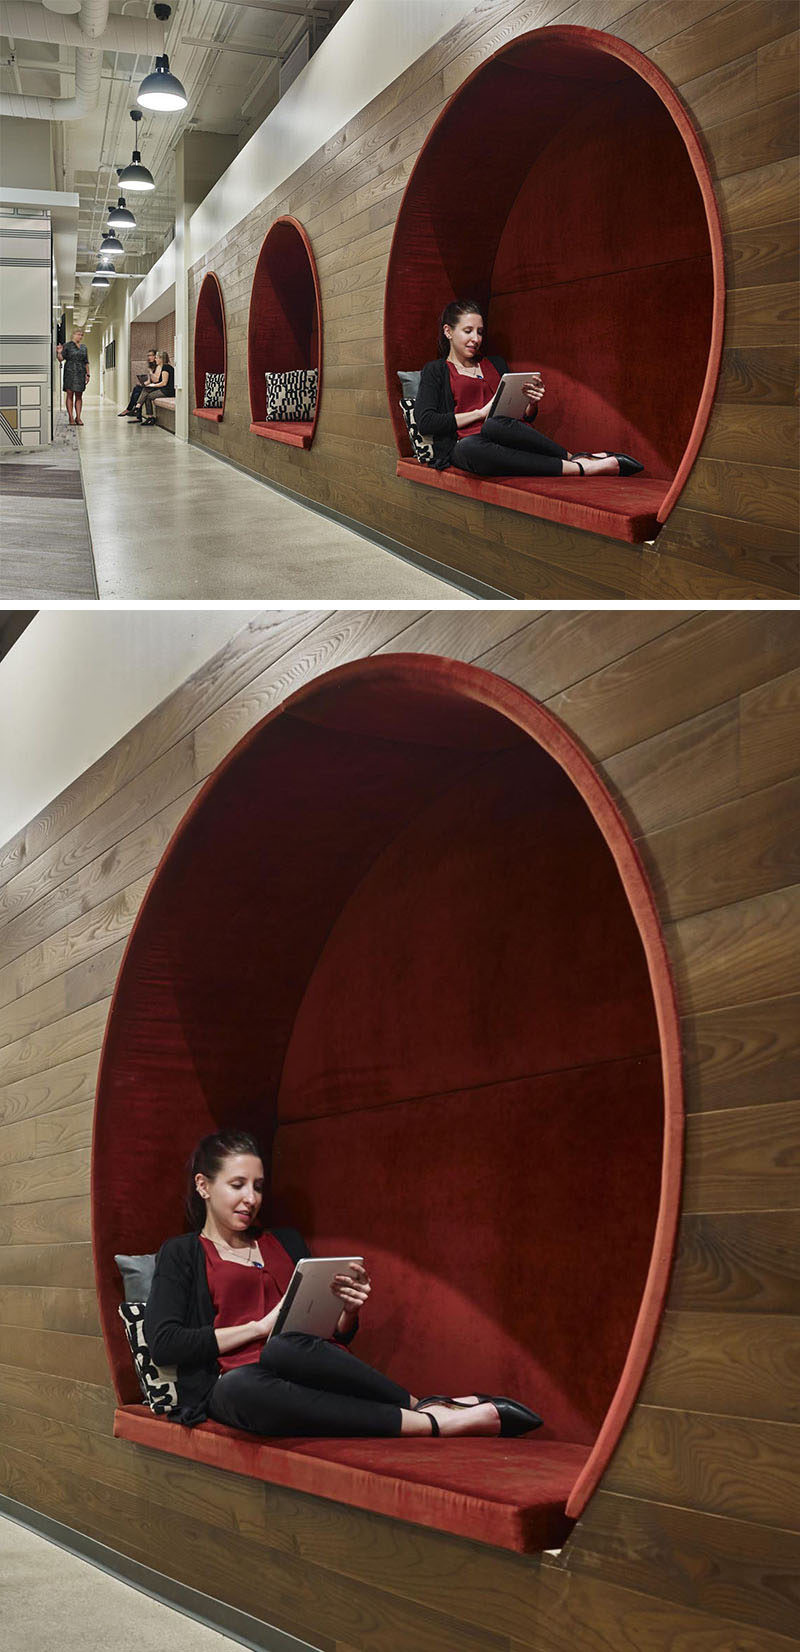 In this modern office, three circular seating nooks with red upholstered cushions are embedded within a dark wood wall, creating a cozy and intimate environment to work or take time away from a screen.